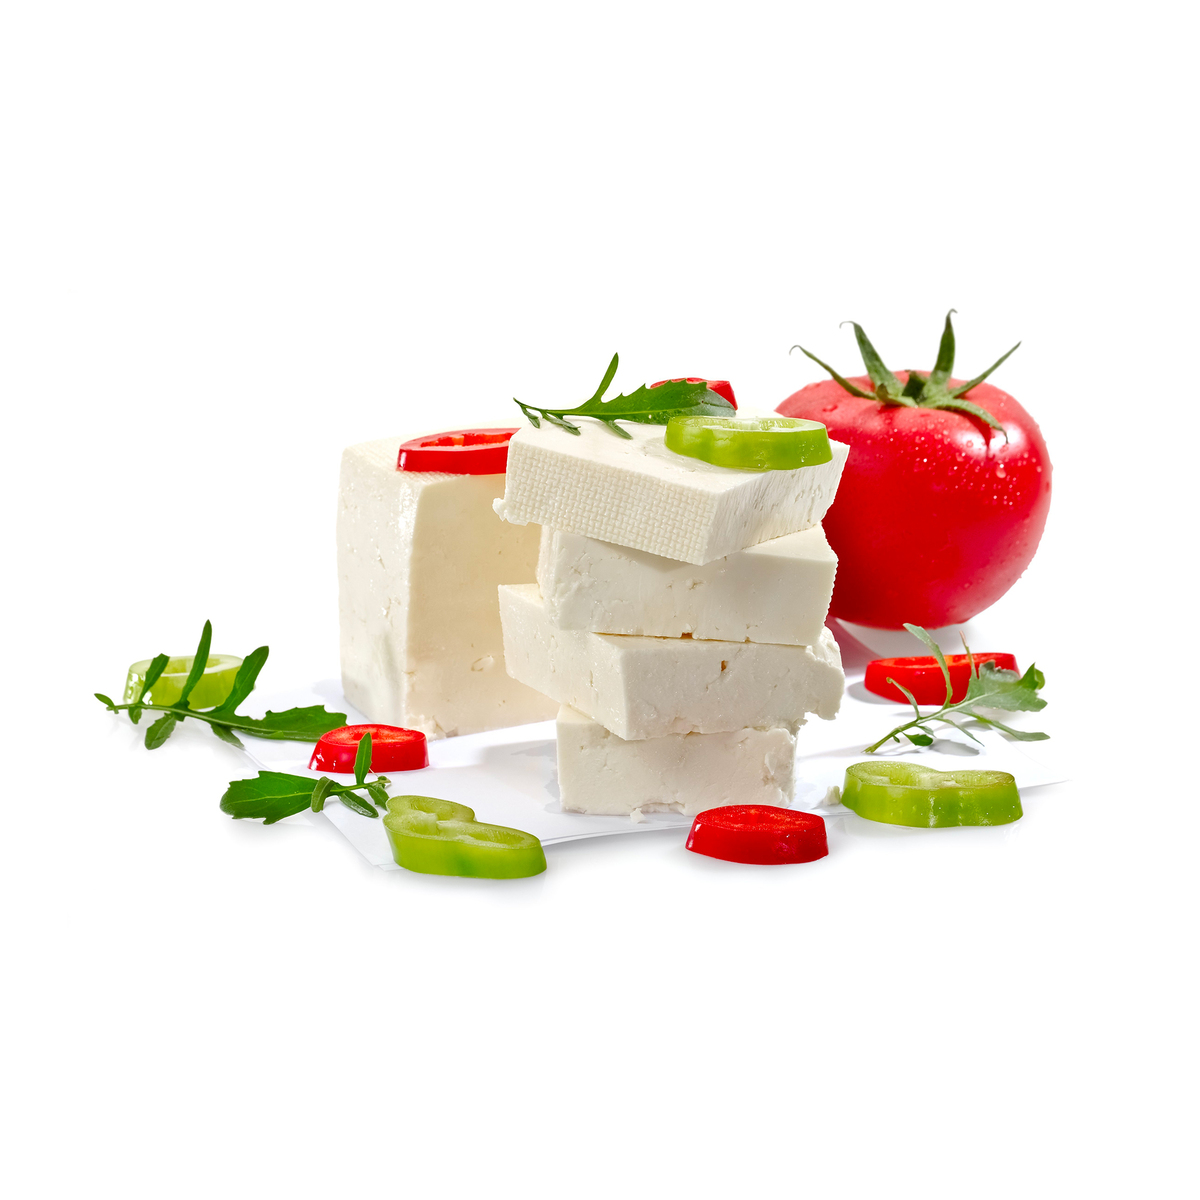 Cyprus Feta Cheese with Pepper 250g Approx. Weight